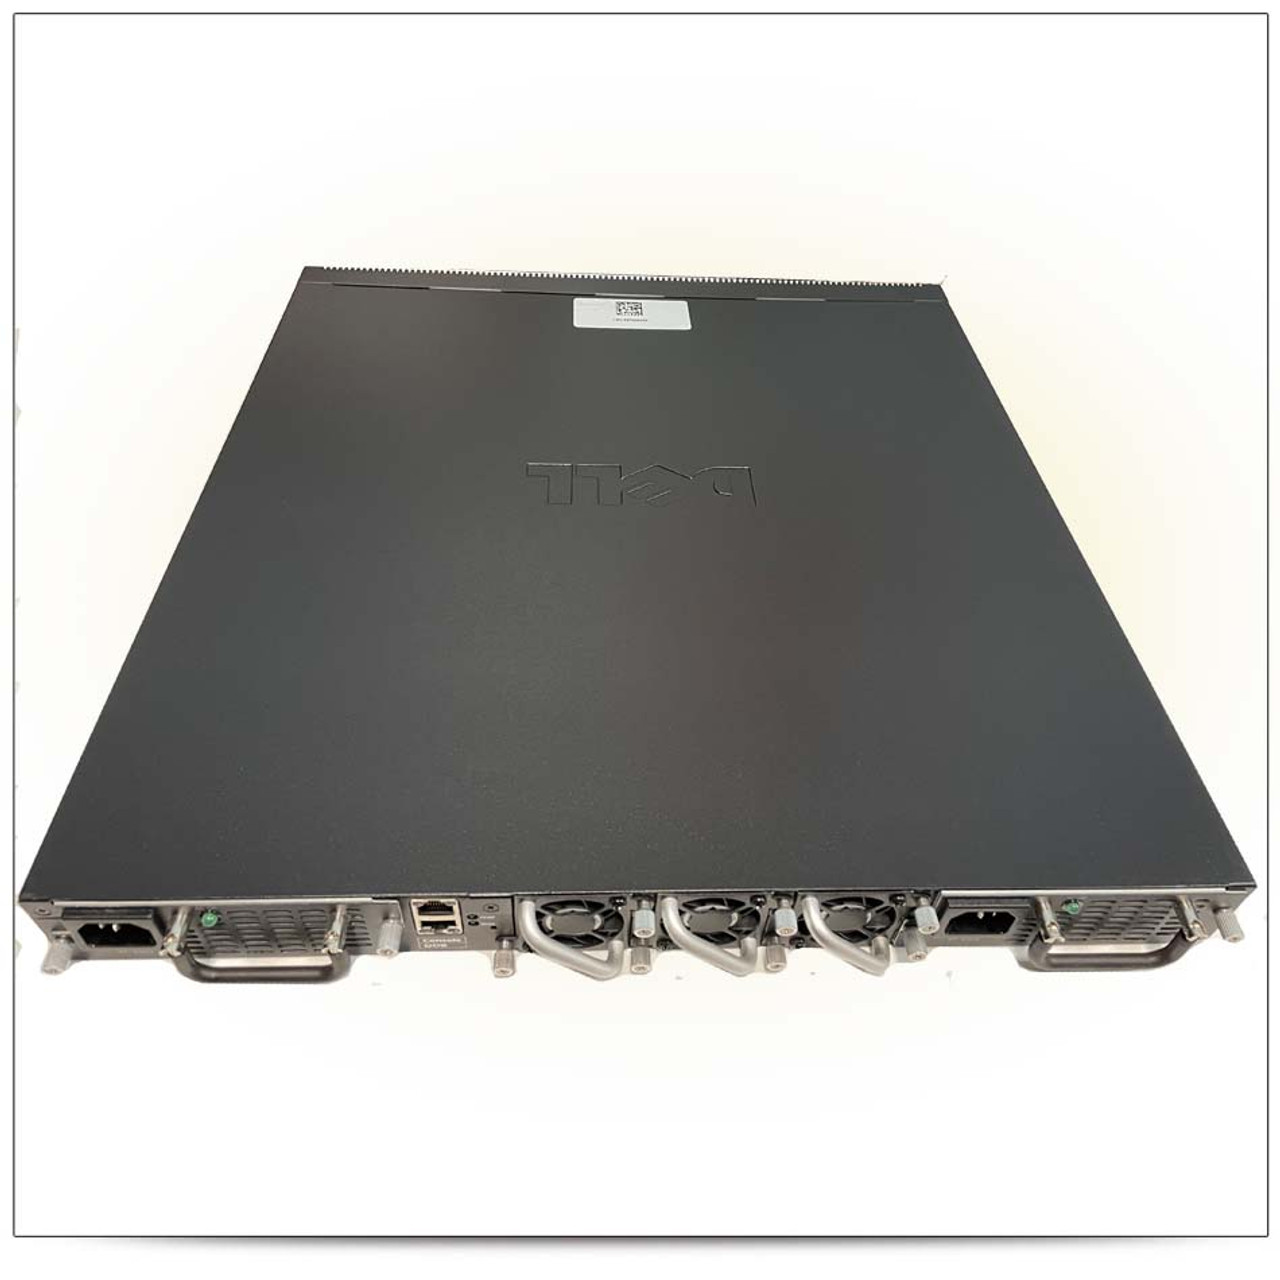 Dell PowerConnect 8024 10GbE Network Switch Copper 10GBase-T